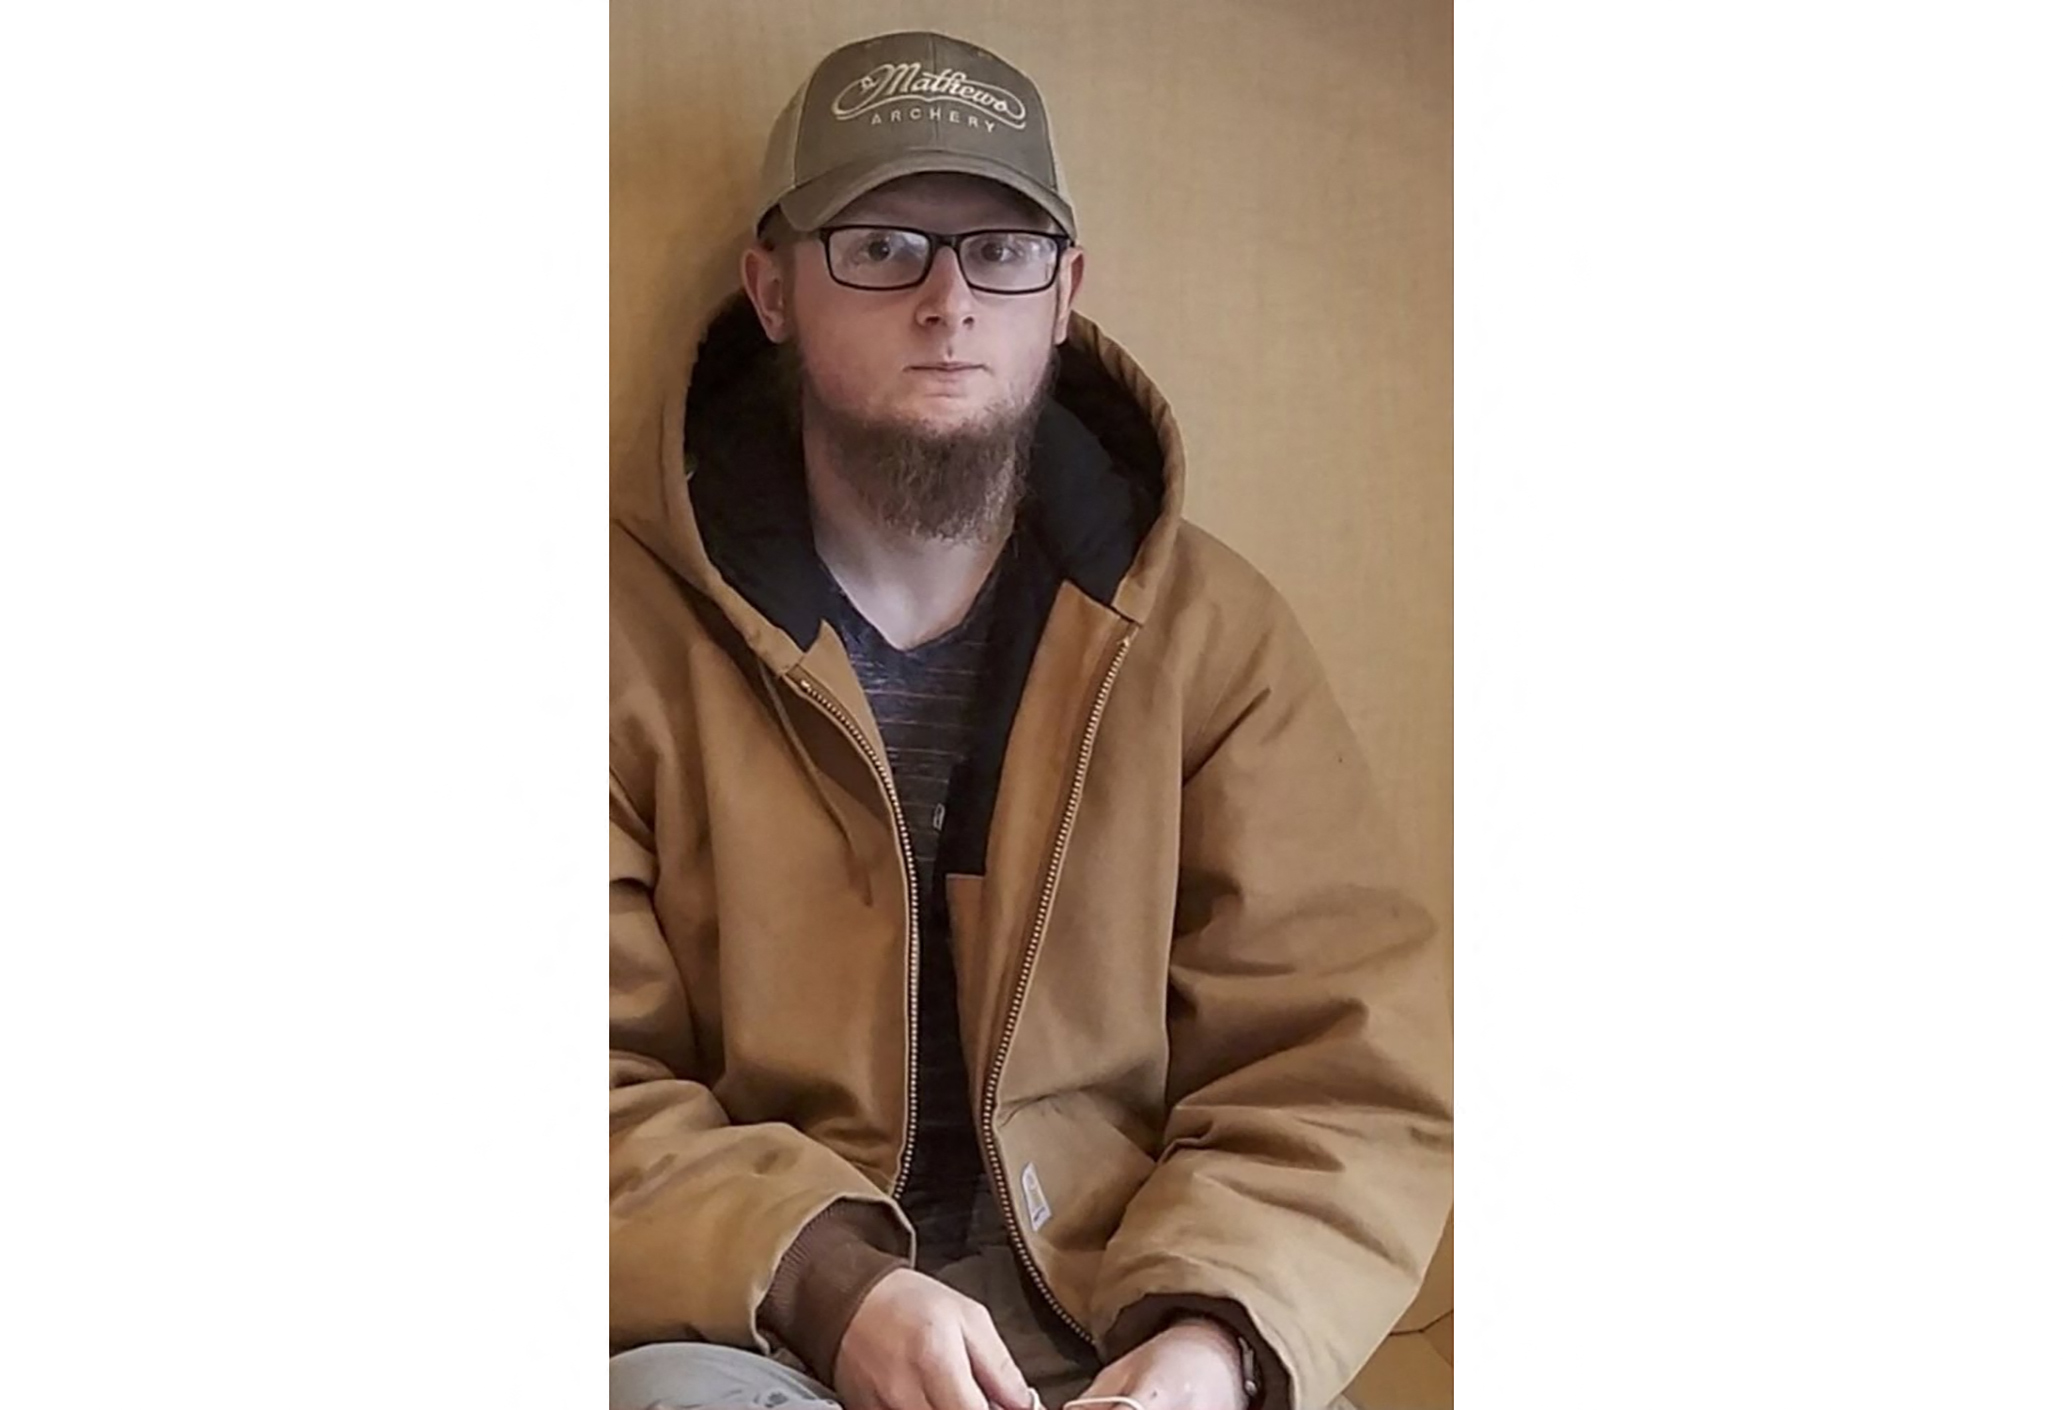 This undated photo released by the Cherokee Sheriff's Office on March 16, 2021 shows Robert Aaron Long, who was taken into custody in Crisp County. PHOTO: Cherokee Sheriff's Office / AFP